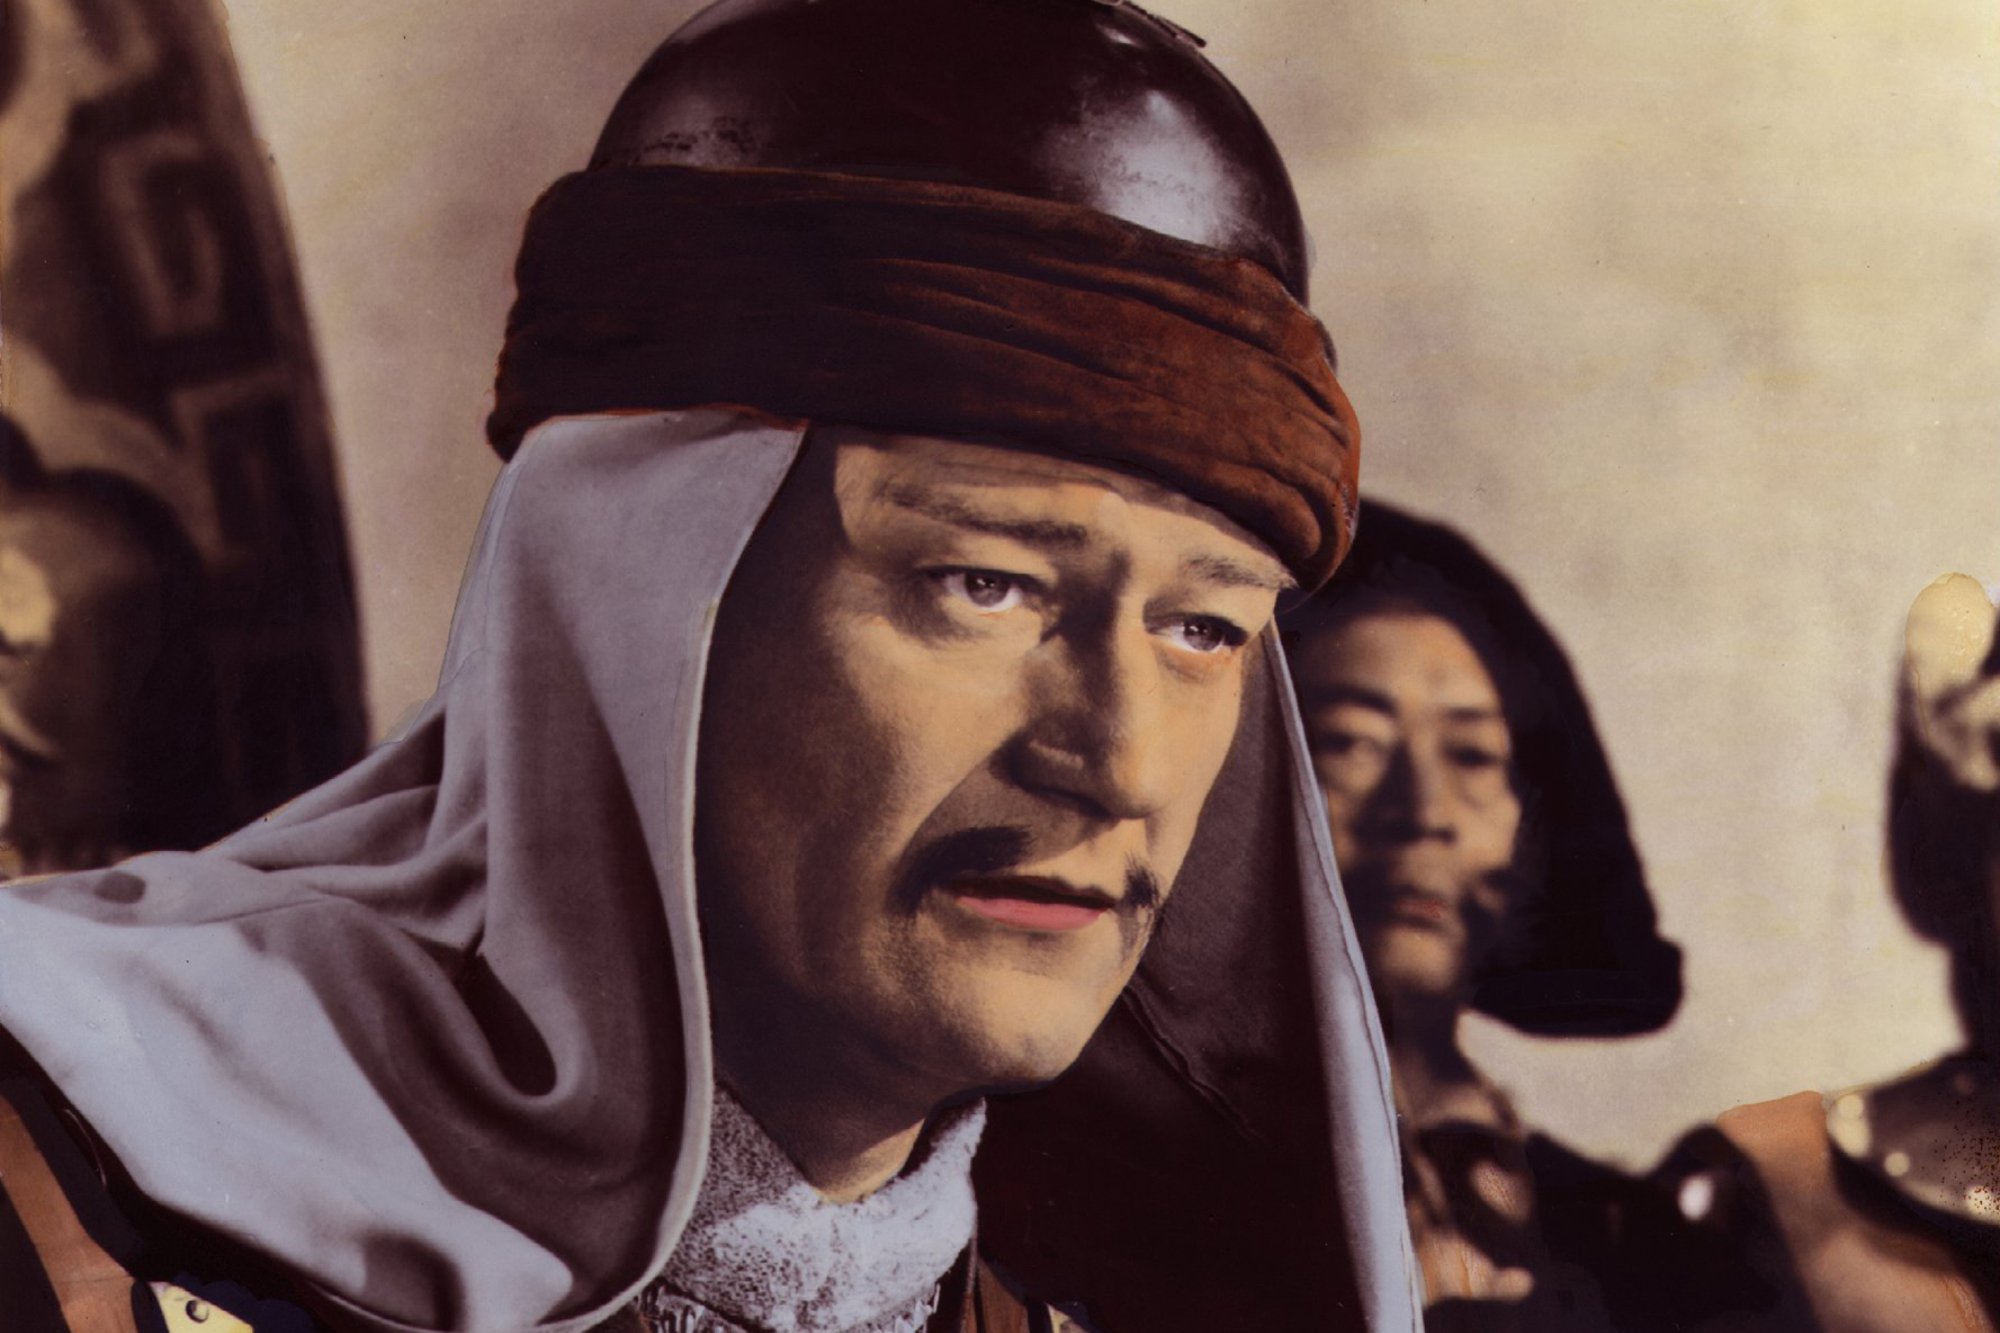 'The Conqueror' John Wayne as Genghis Khan wearing a mustace, hate, and hooded clothing